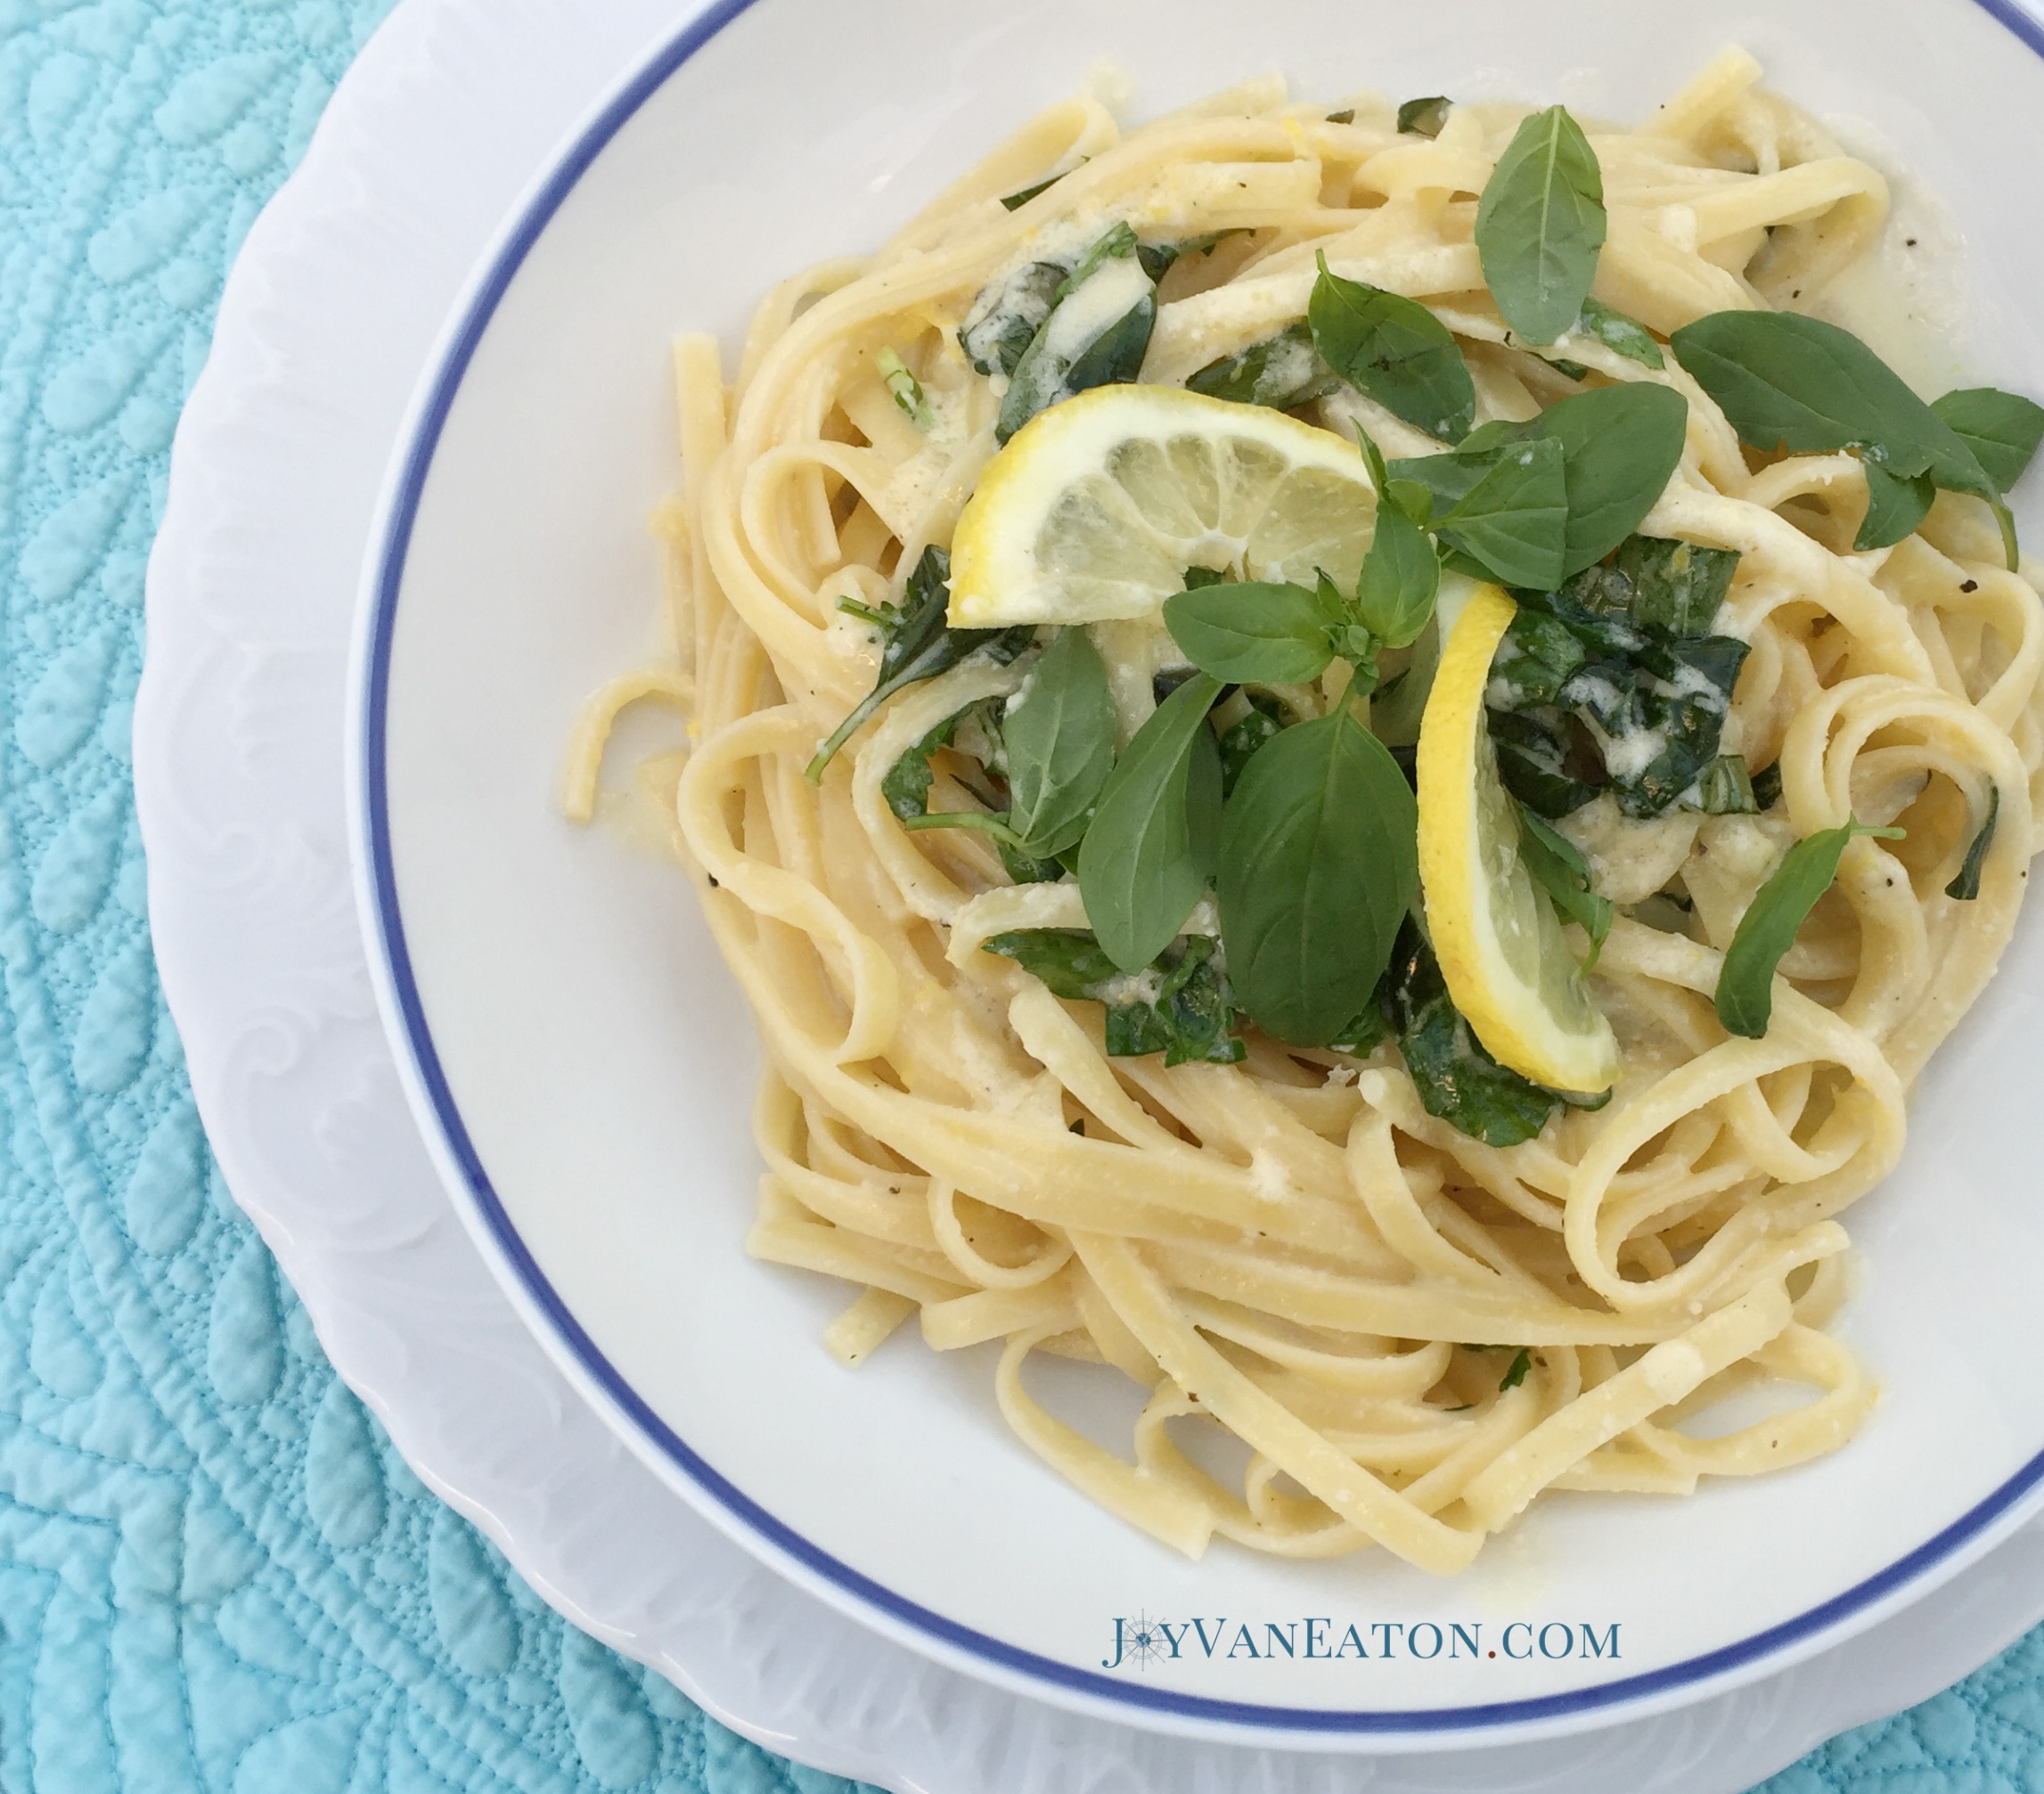 Lemon Pasta: a Good Way to Welcome Spring!